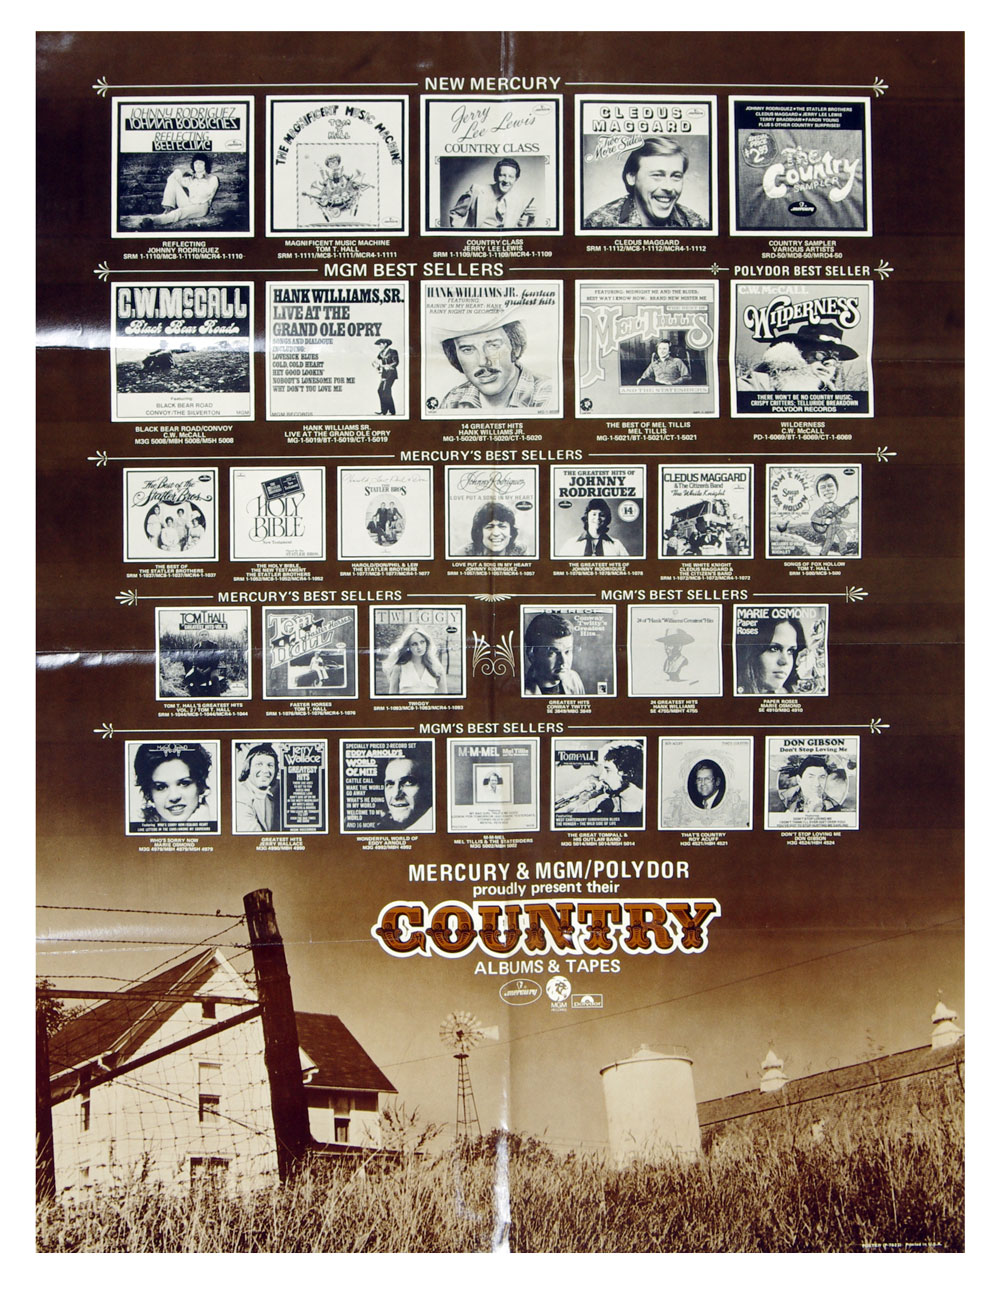 Country Music Best Seller Album Promotion Poster 1975 Mercury MGM Polydor